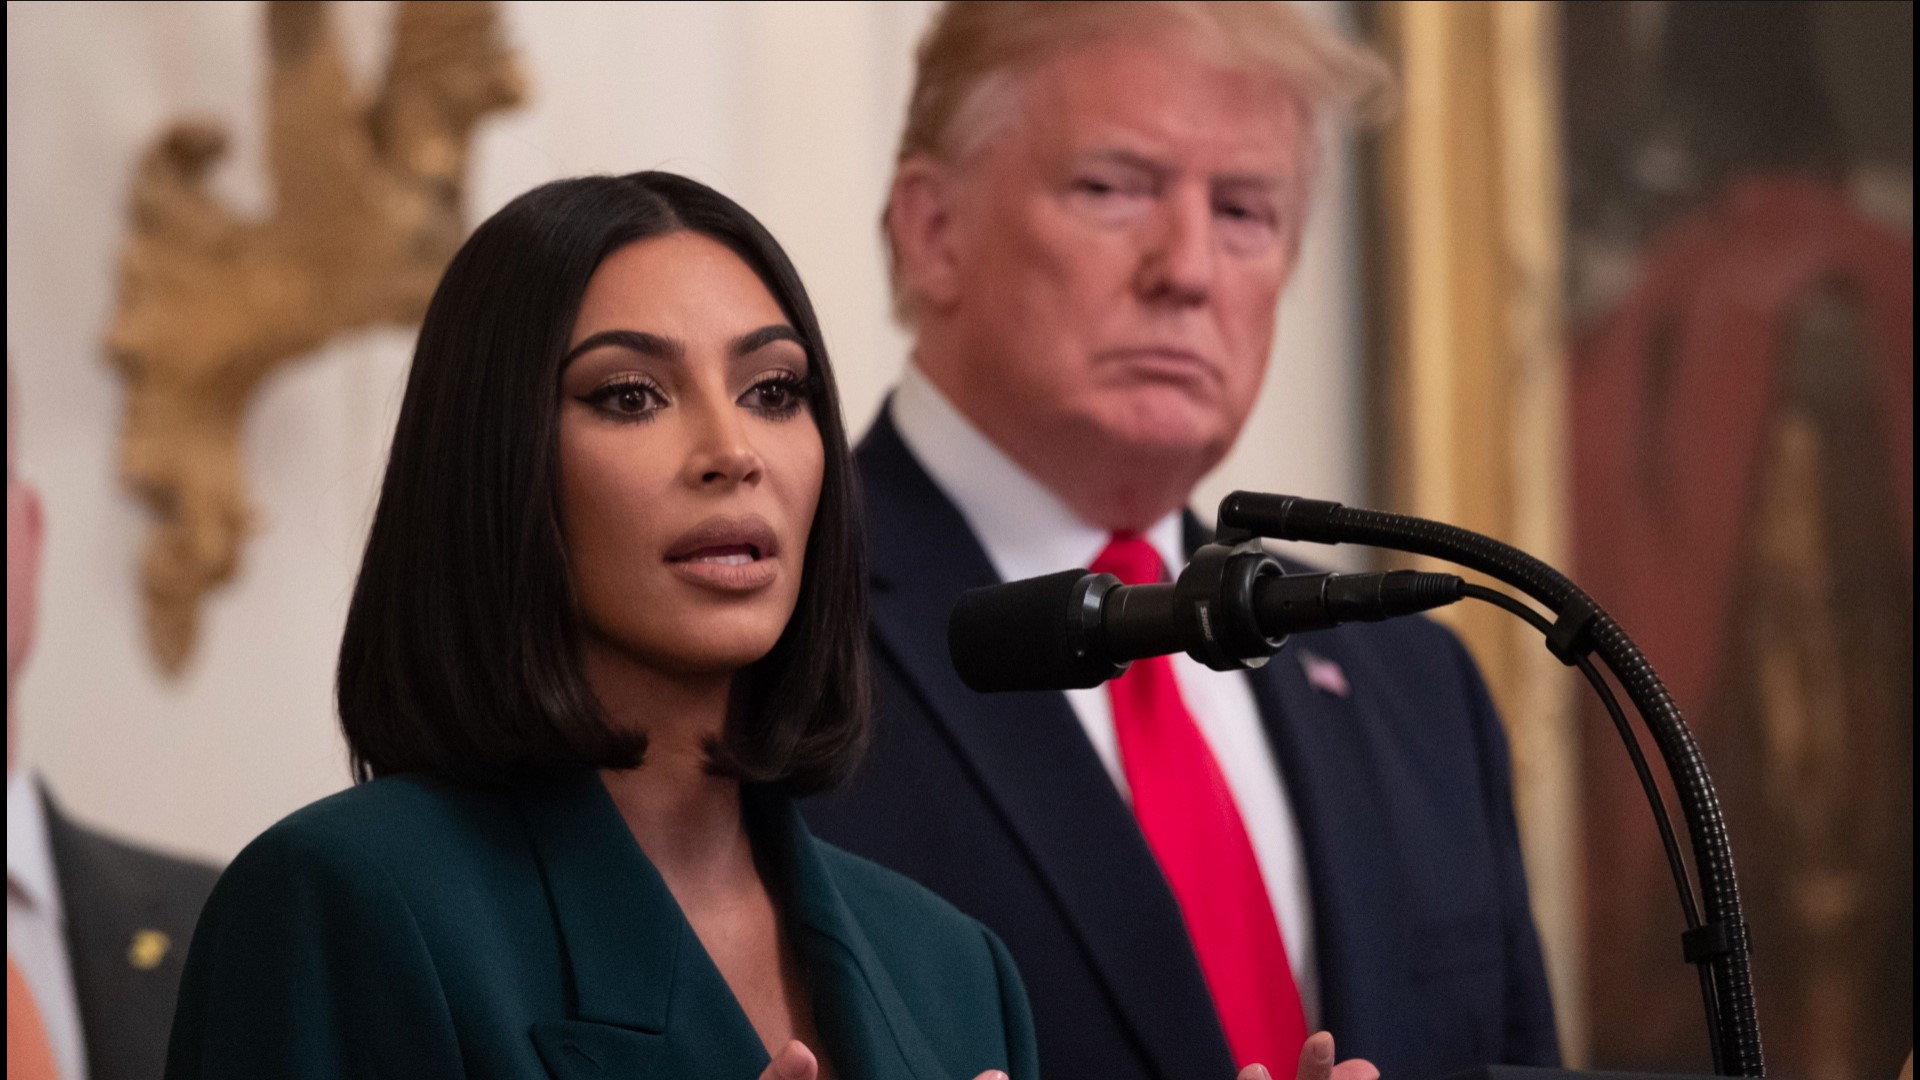 Kim Kardashian West announced that she will be heading back to the White House to meet President Trump to discuss criminal justice reform. Veuer's Justin Kircher has the story.